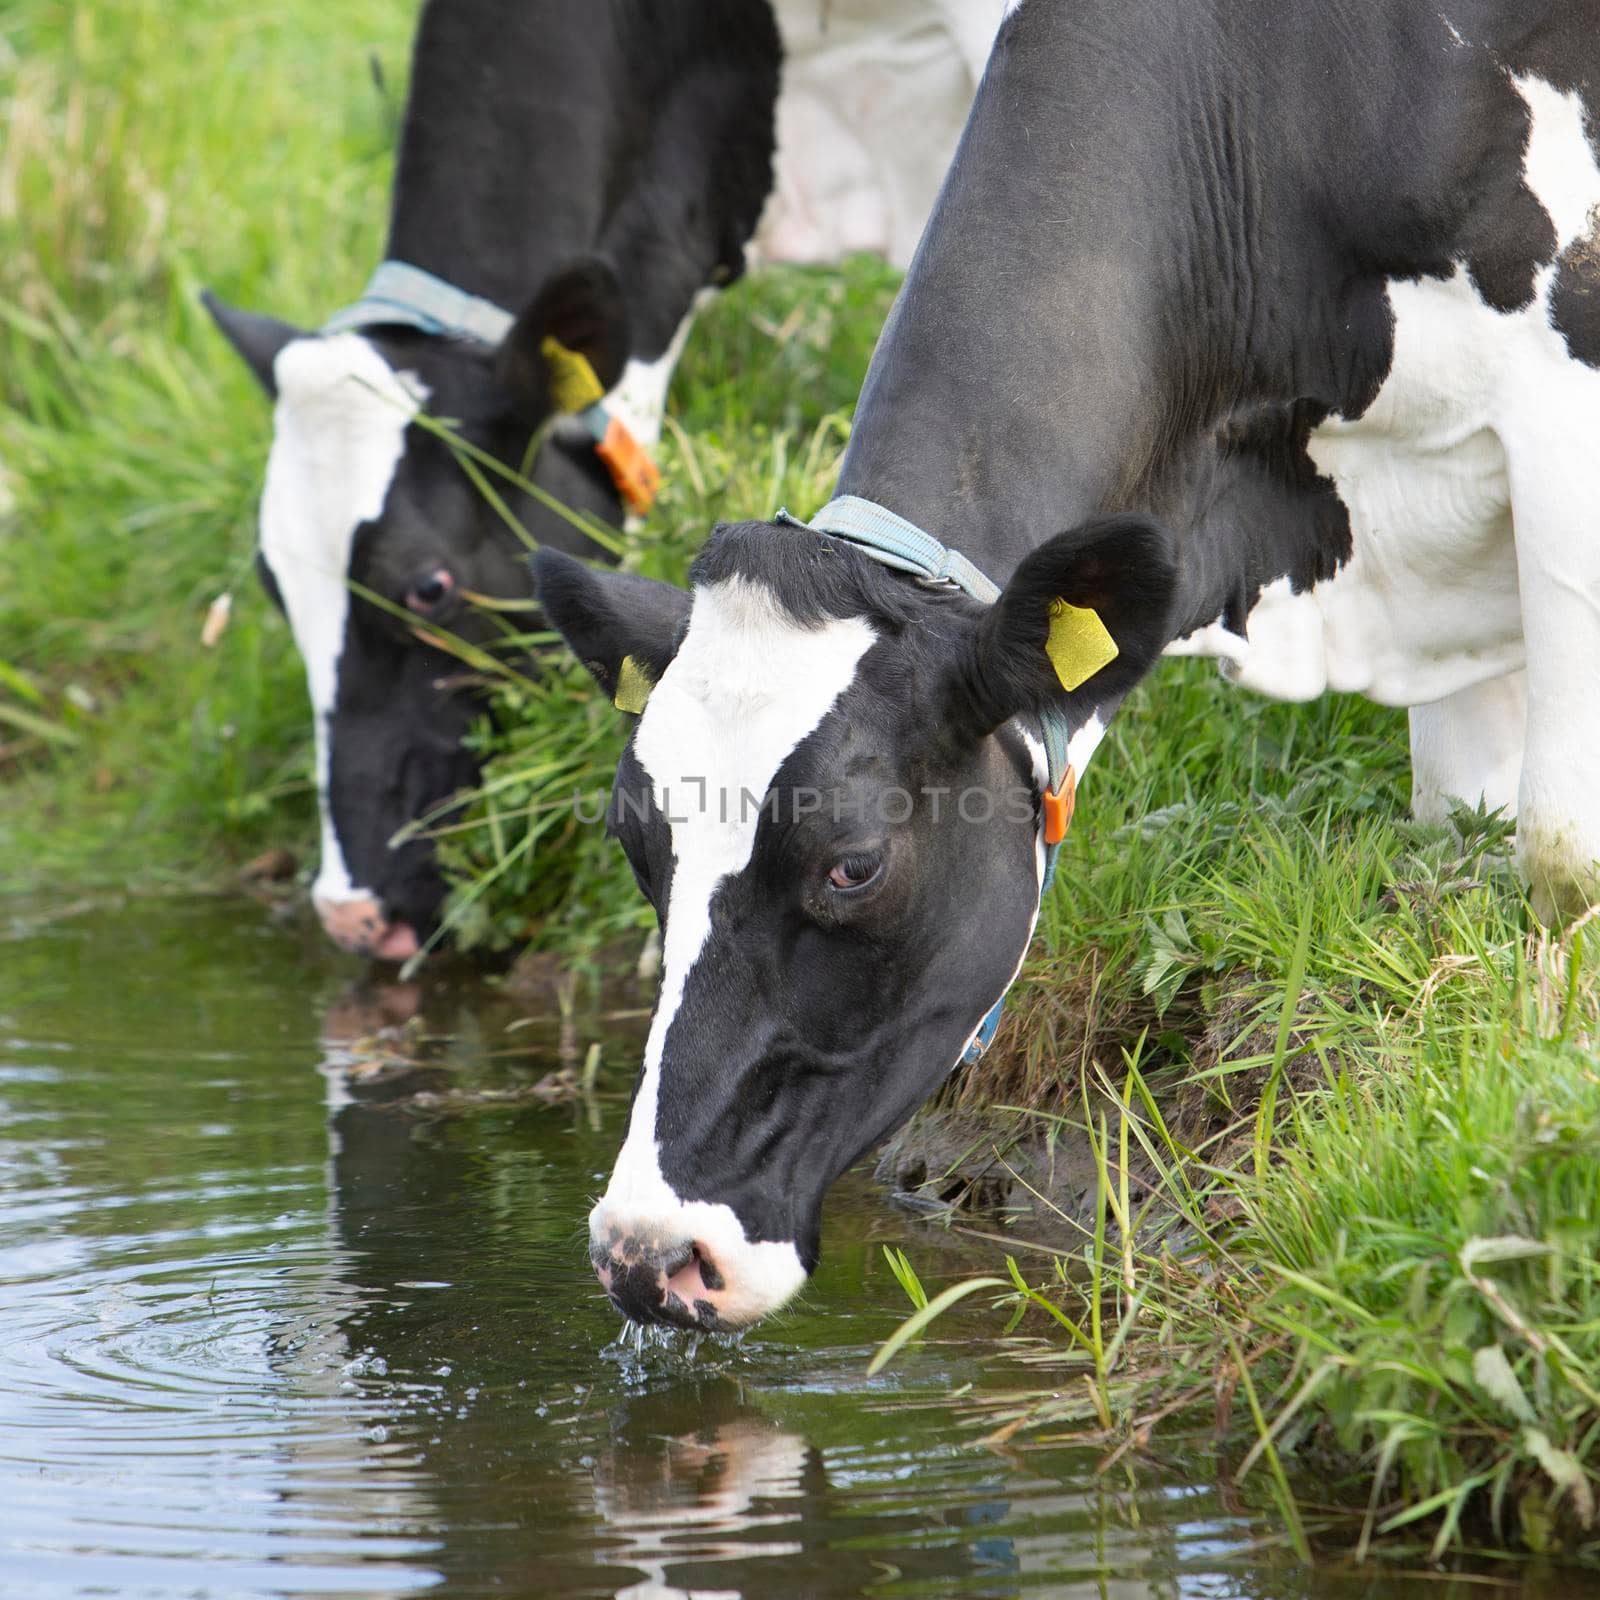 black and white spotted cows drink from water of canal in holland by ahavelaar